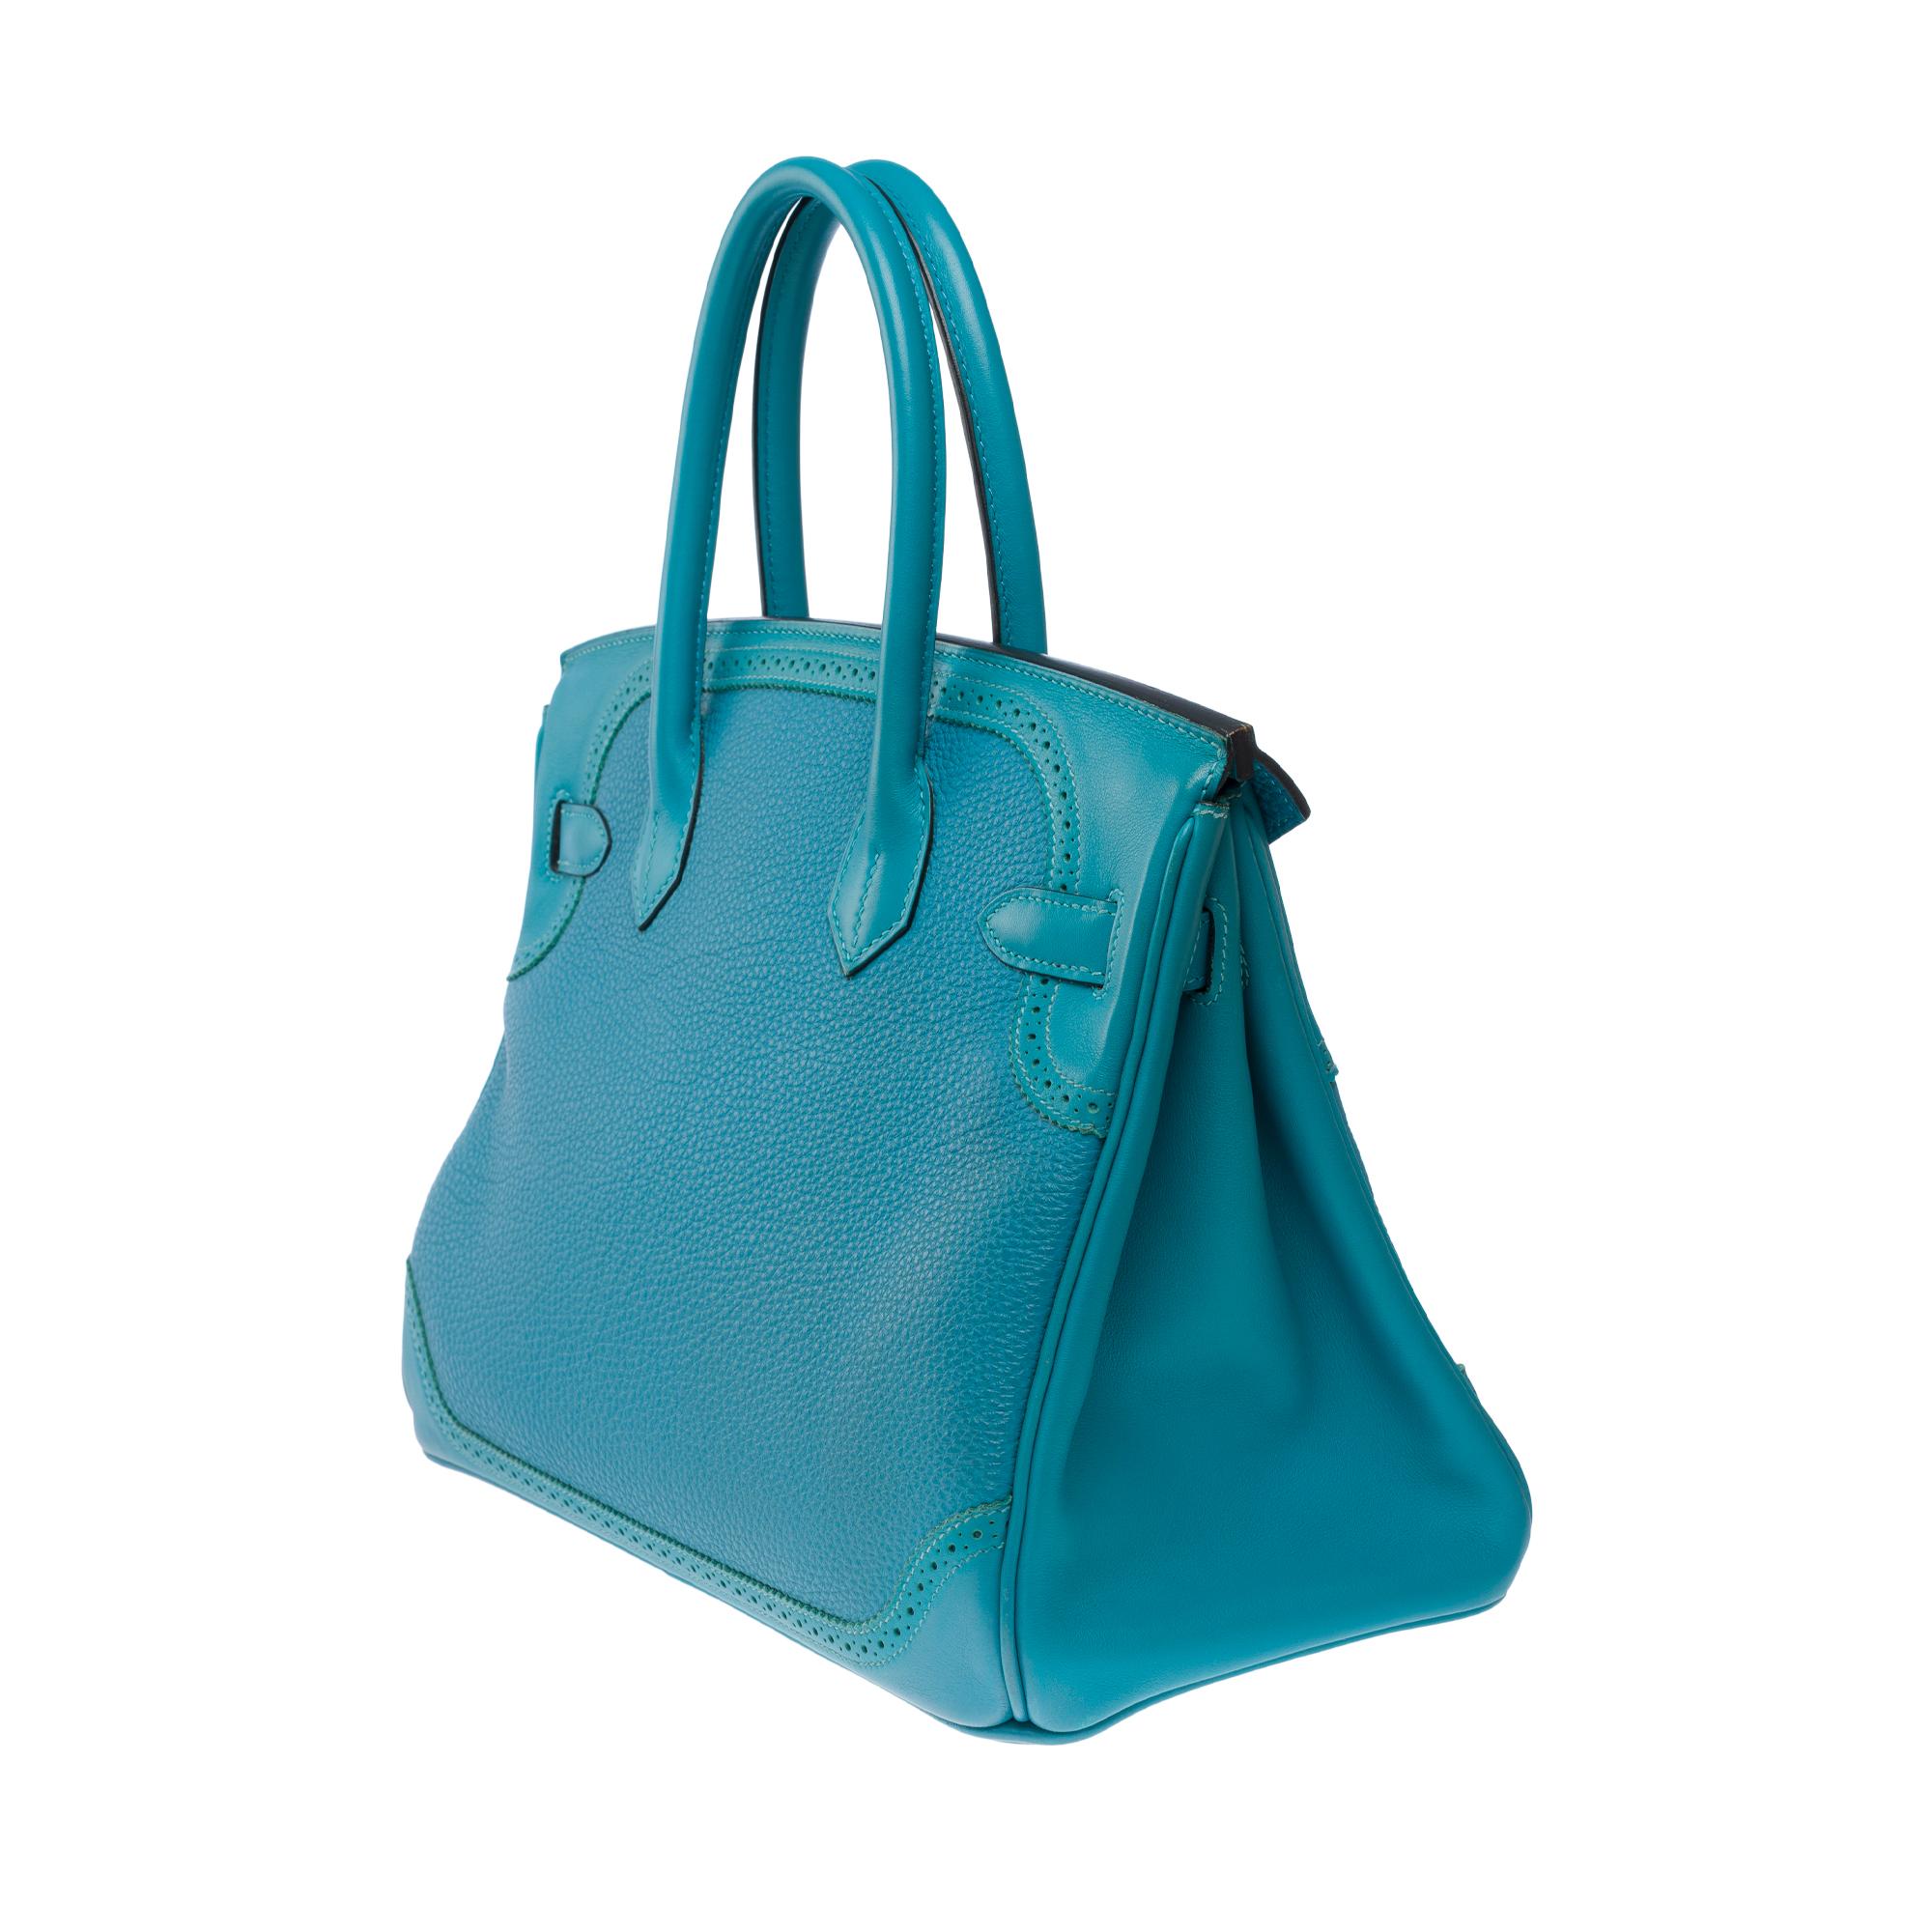 Ghillies Limited Edition Hermes Birkin 30 handbag in Turquoise Blue leather, SHW For Sale 2